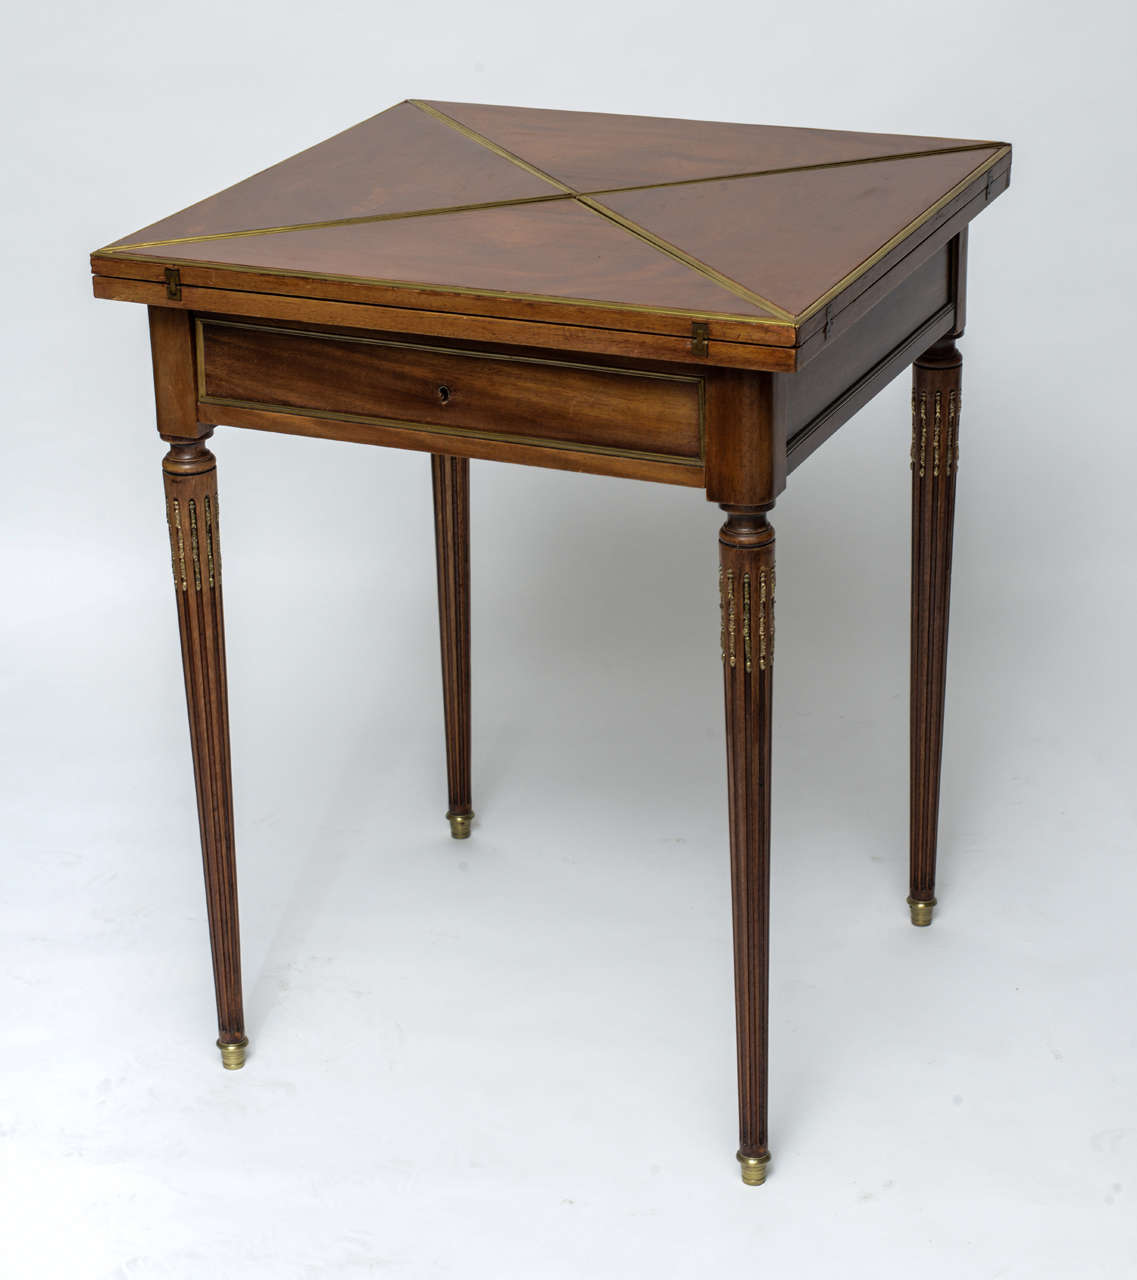 Elegant Louis XVI style card table with doré bronze trim and mounts. Top opens and swivels to reveal green felt playing area. Single drawer to store your accoutrements.